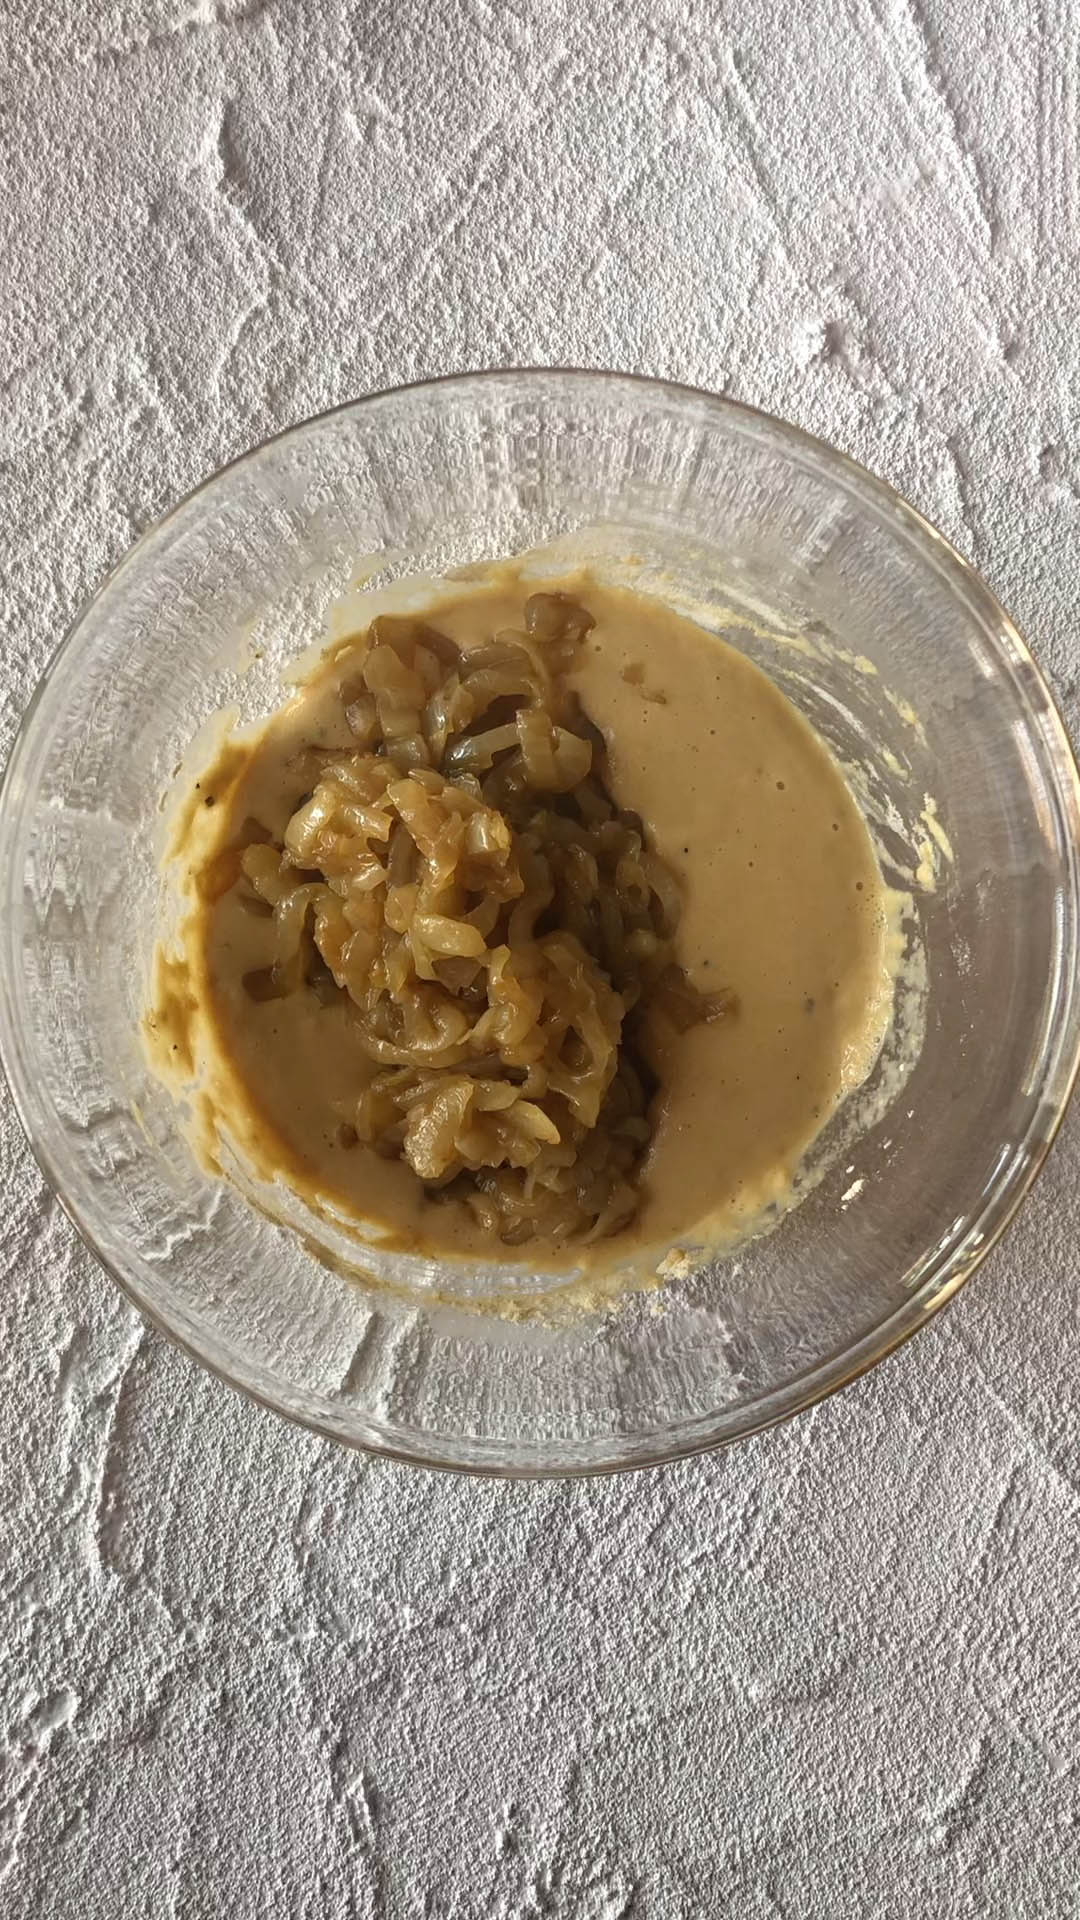 Caramelized onions and batter in a bowl.